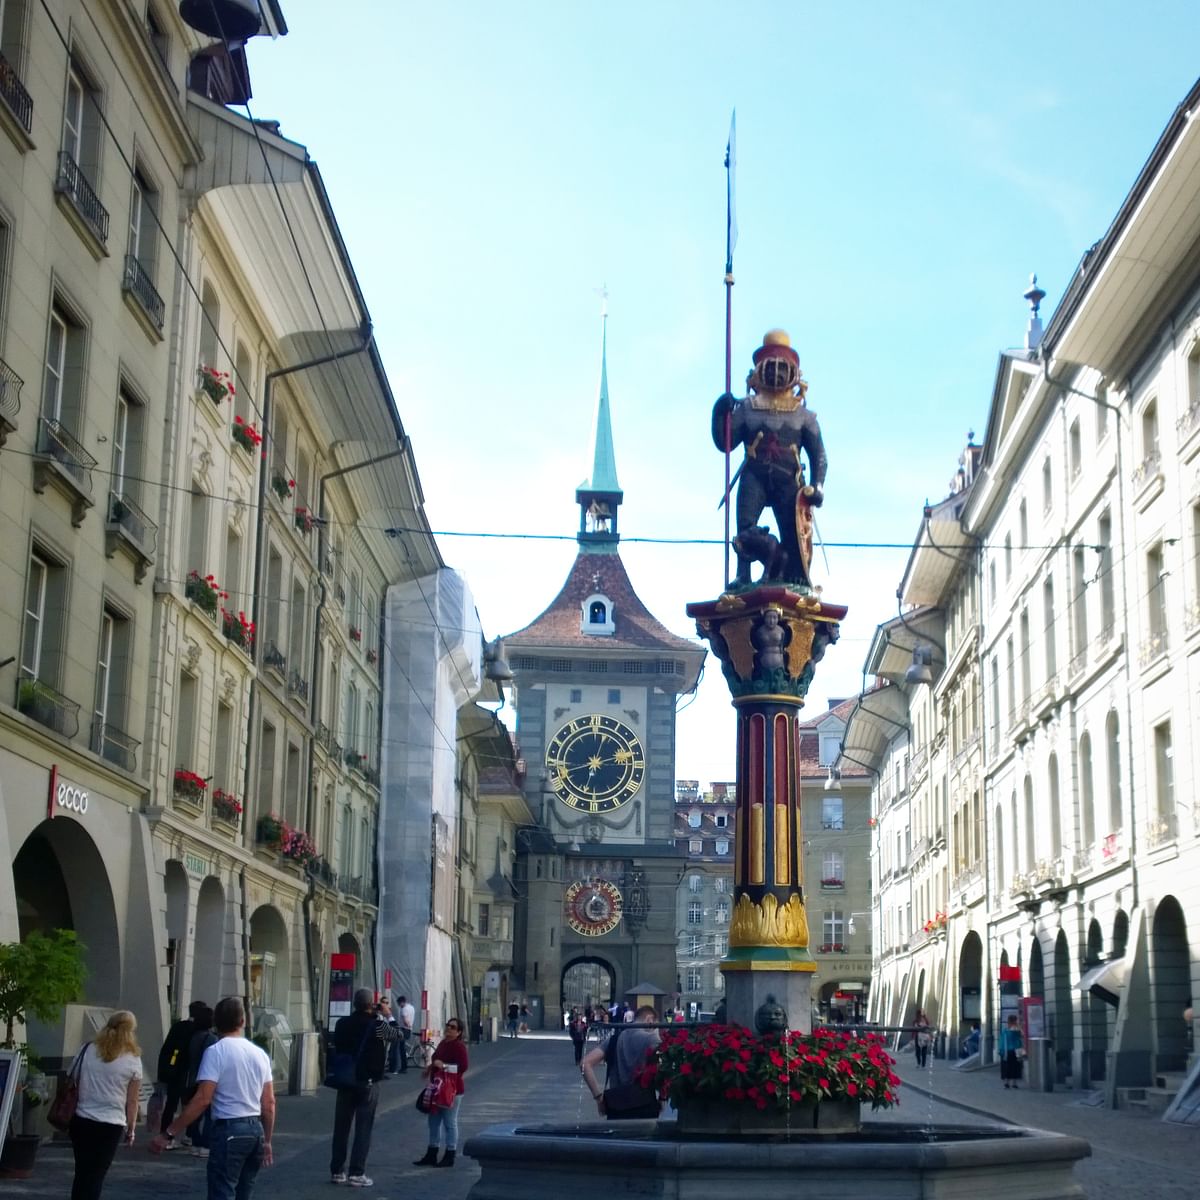 Yash Raj may have single-handedly popularised Switzerland, but the capital Bern is a must-see off the beaten track.